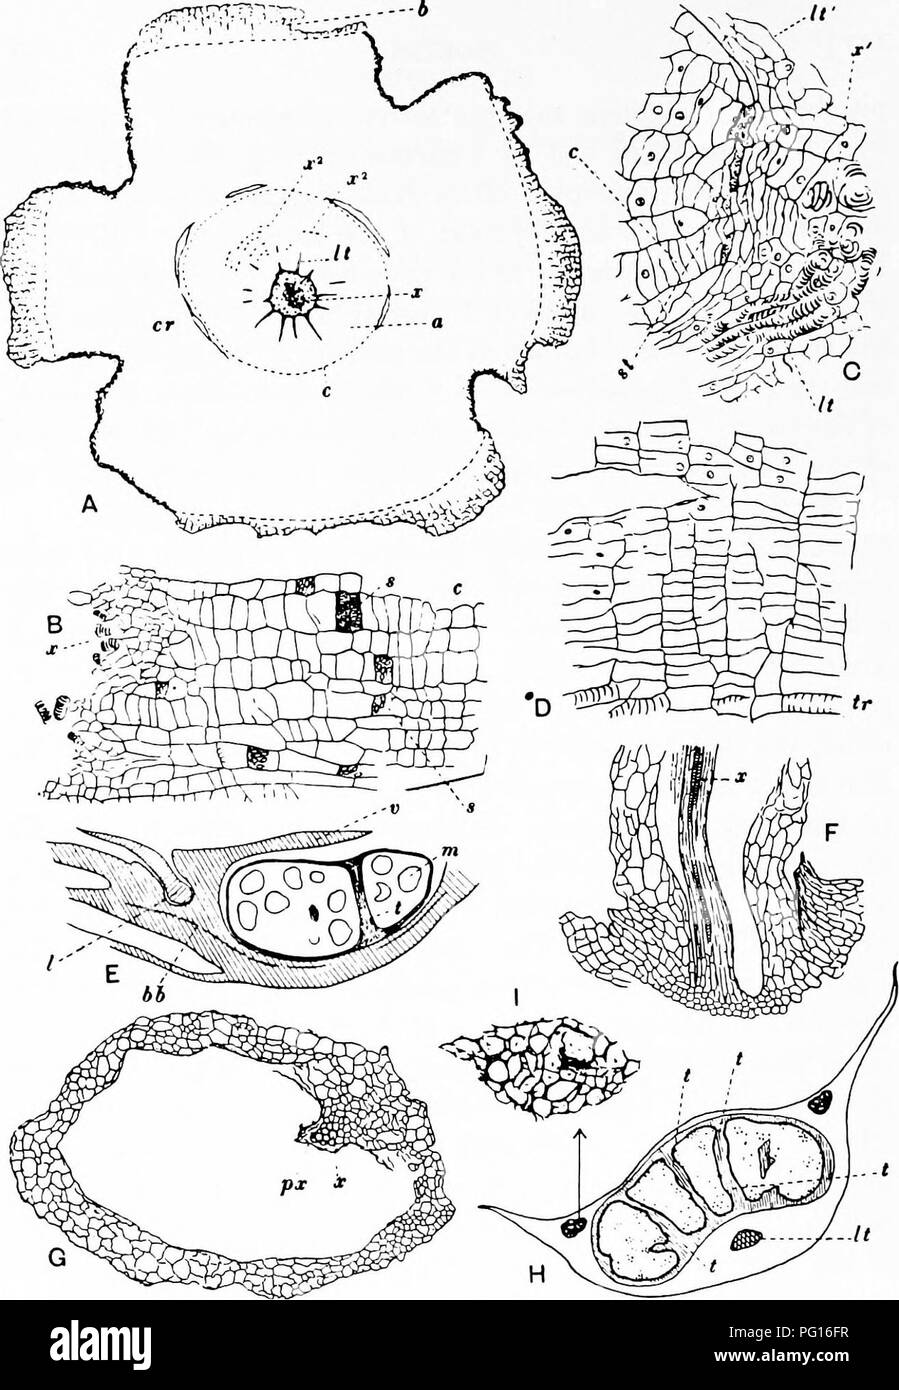 . Fossil plants : for students of botany and geology . Paleobotany. ,^^p?'~^)-. FiQ. 133. Isoetes lacustris. A. Transverse section of stem: cr, cortex; x, i^ xylem; c, cambium; a, thin-walled tissue; It, leai-traces; 6, dead tissue. B, C, D. Portions of A enlarged. E. Longitudinal radial section of sporophyll-base: v, velum; I, ligule ; bb, vascular bundle; m, megaspores; t, sterile tissue. F. Longitudinal section through the base of a root. G. Transverse section of root. H. Transverse section of sporophyll, showing sporangium with trabeculae, t; leaf-trace, (iJ), and two groups of secretory c Stock Photo